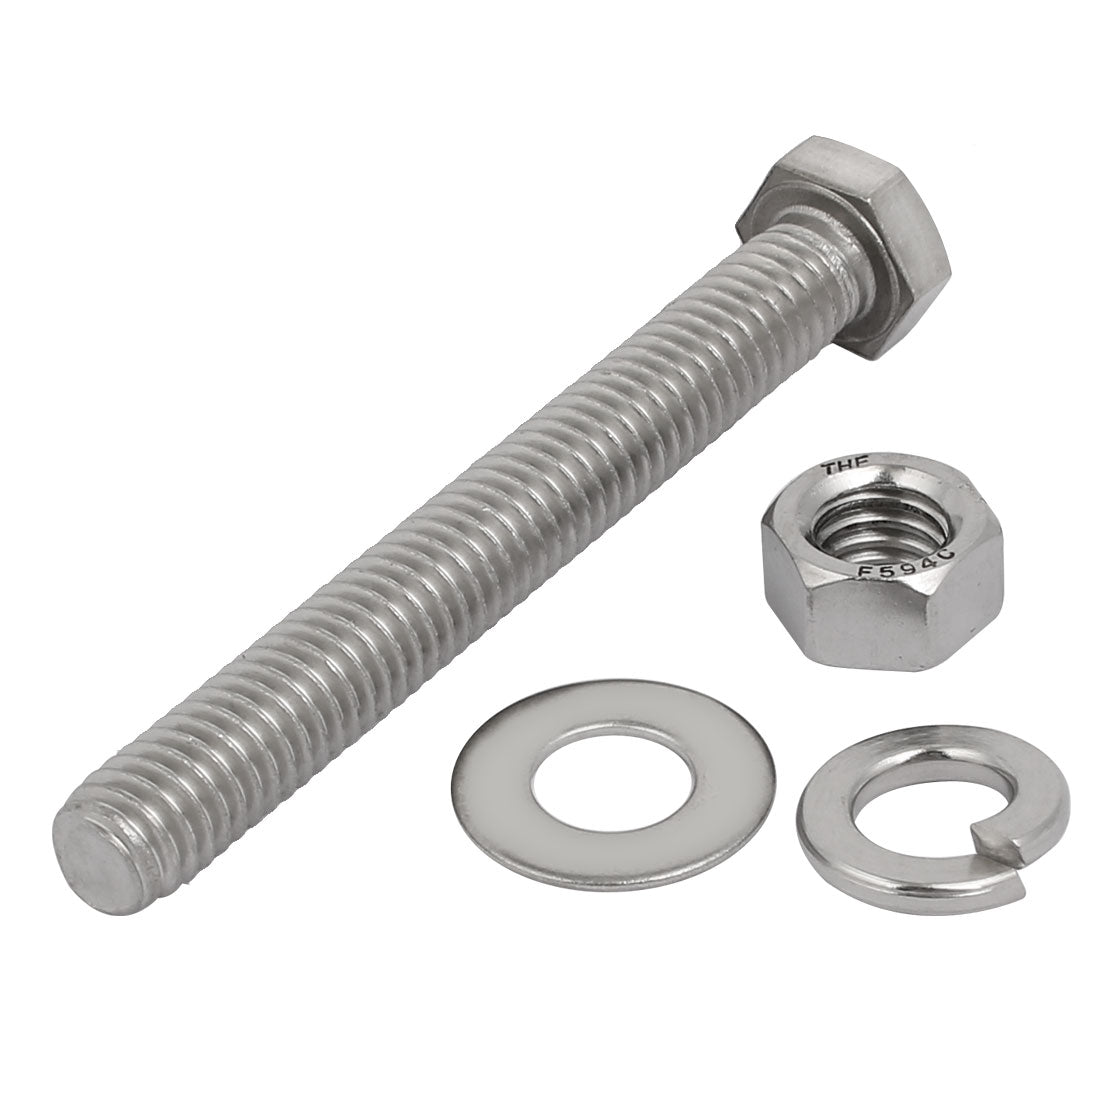 uxcell Uxcell 2Set 304 Stainless Steel 3/8"-16 Thread 3-1/2" Length Hex Bolt Kit w Washer Nut